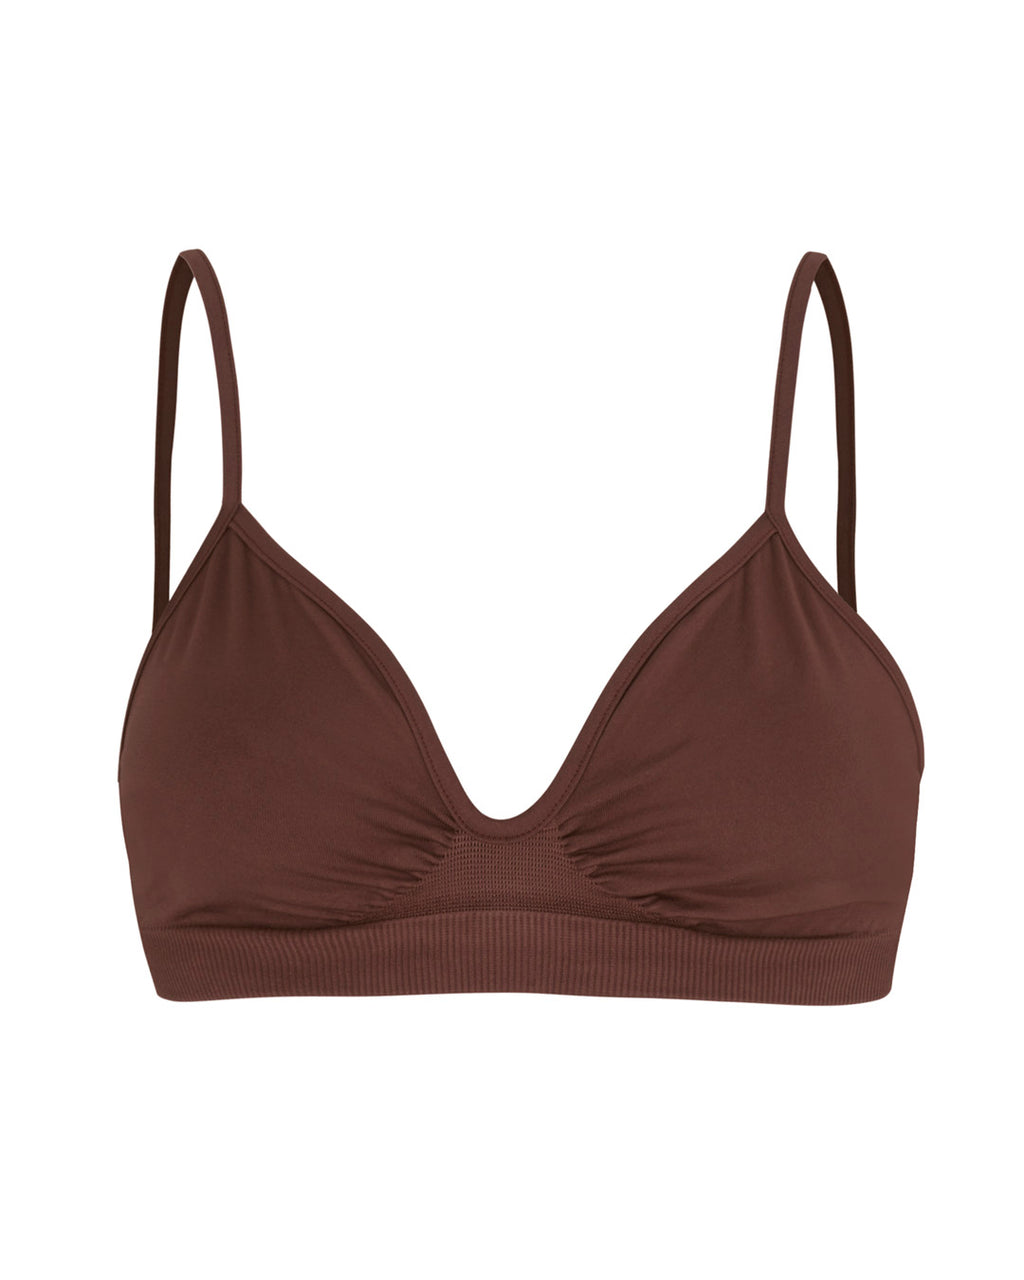 LIBERATED Maroon Top, Supportive Bralette for Bigger Breasts & Plus Sizes